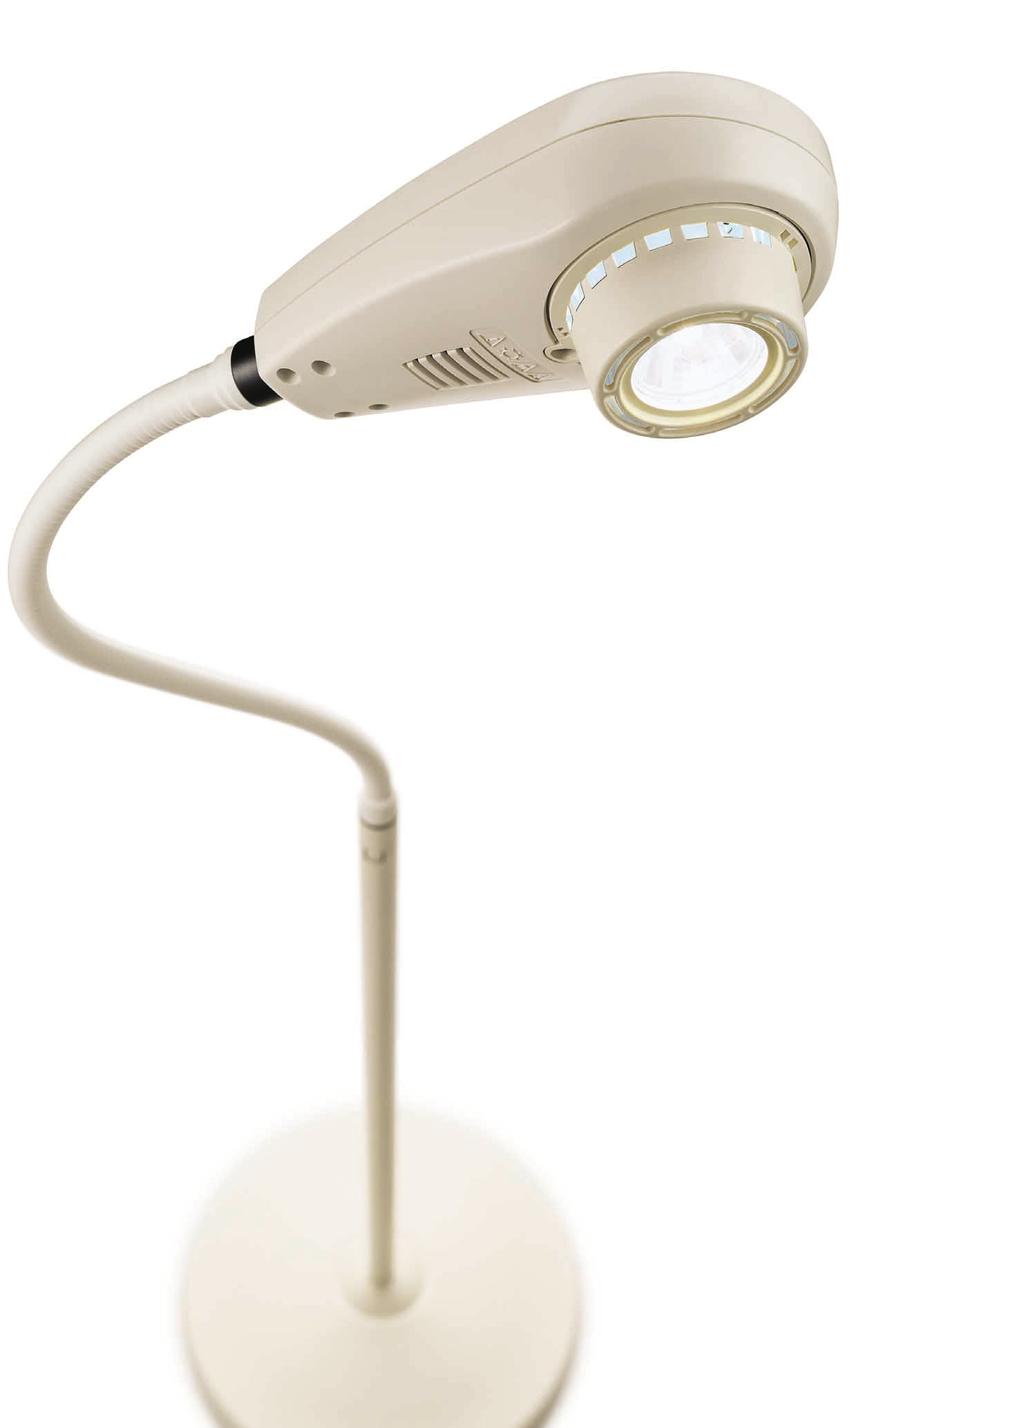 0 WATT LAMP delivers superior light quality across the